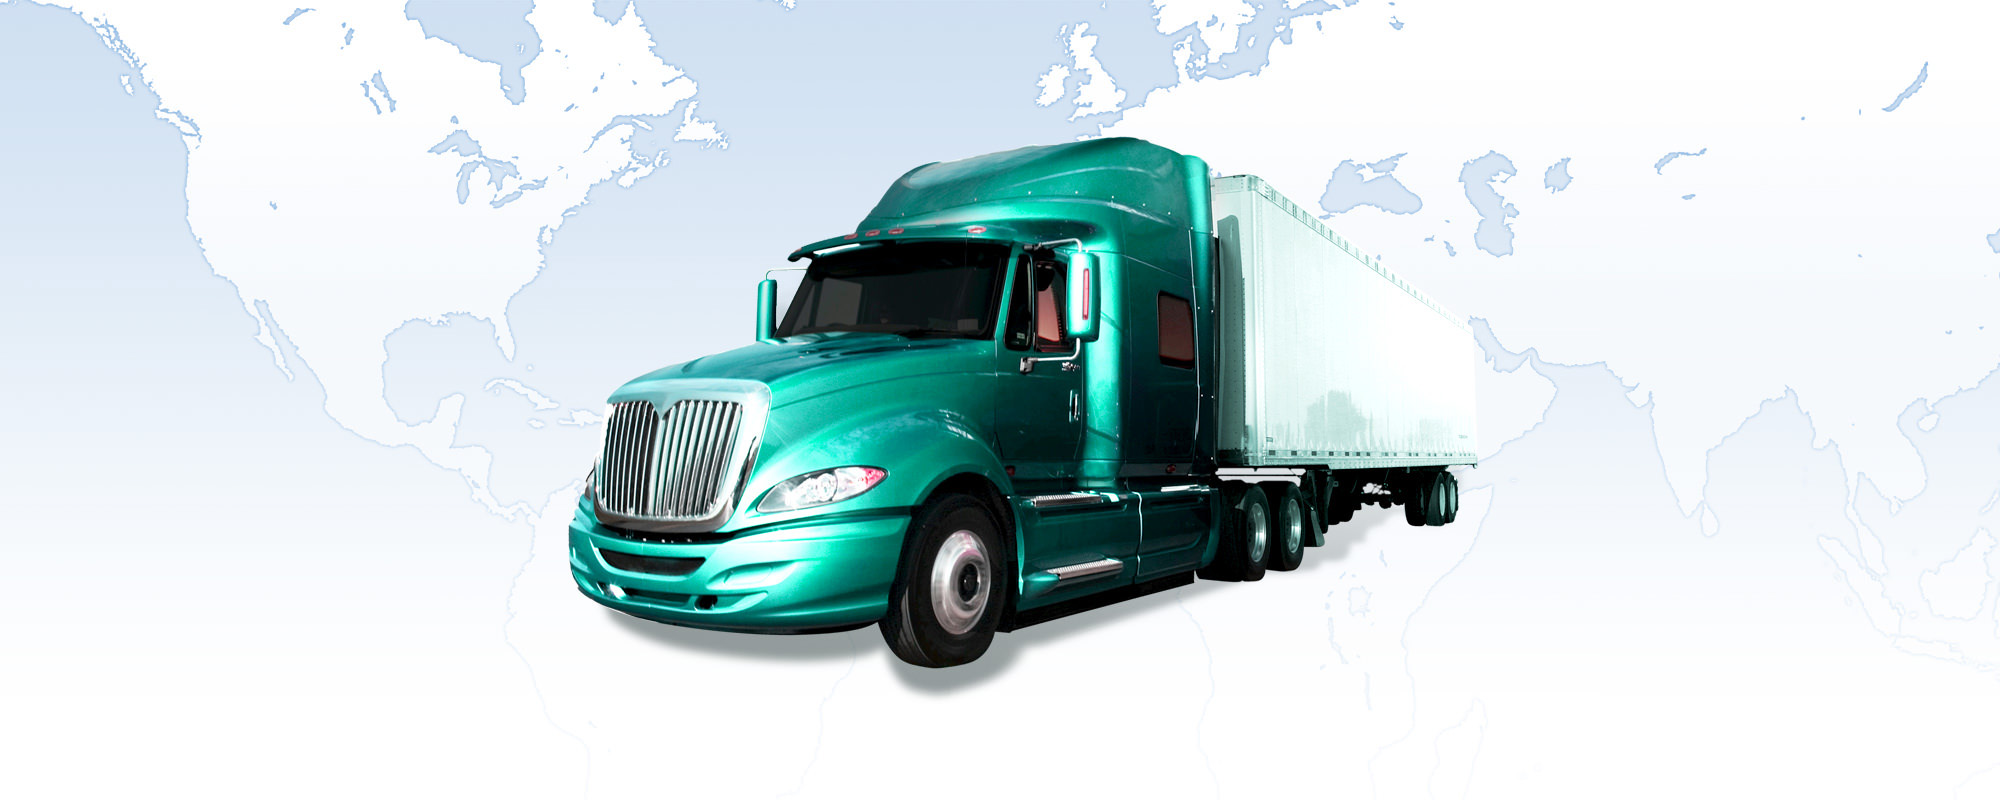 Green semi truck on map background